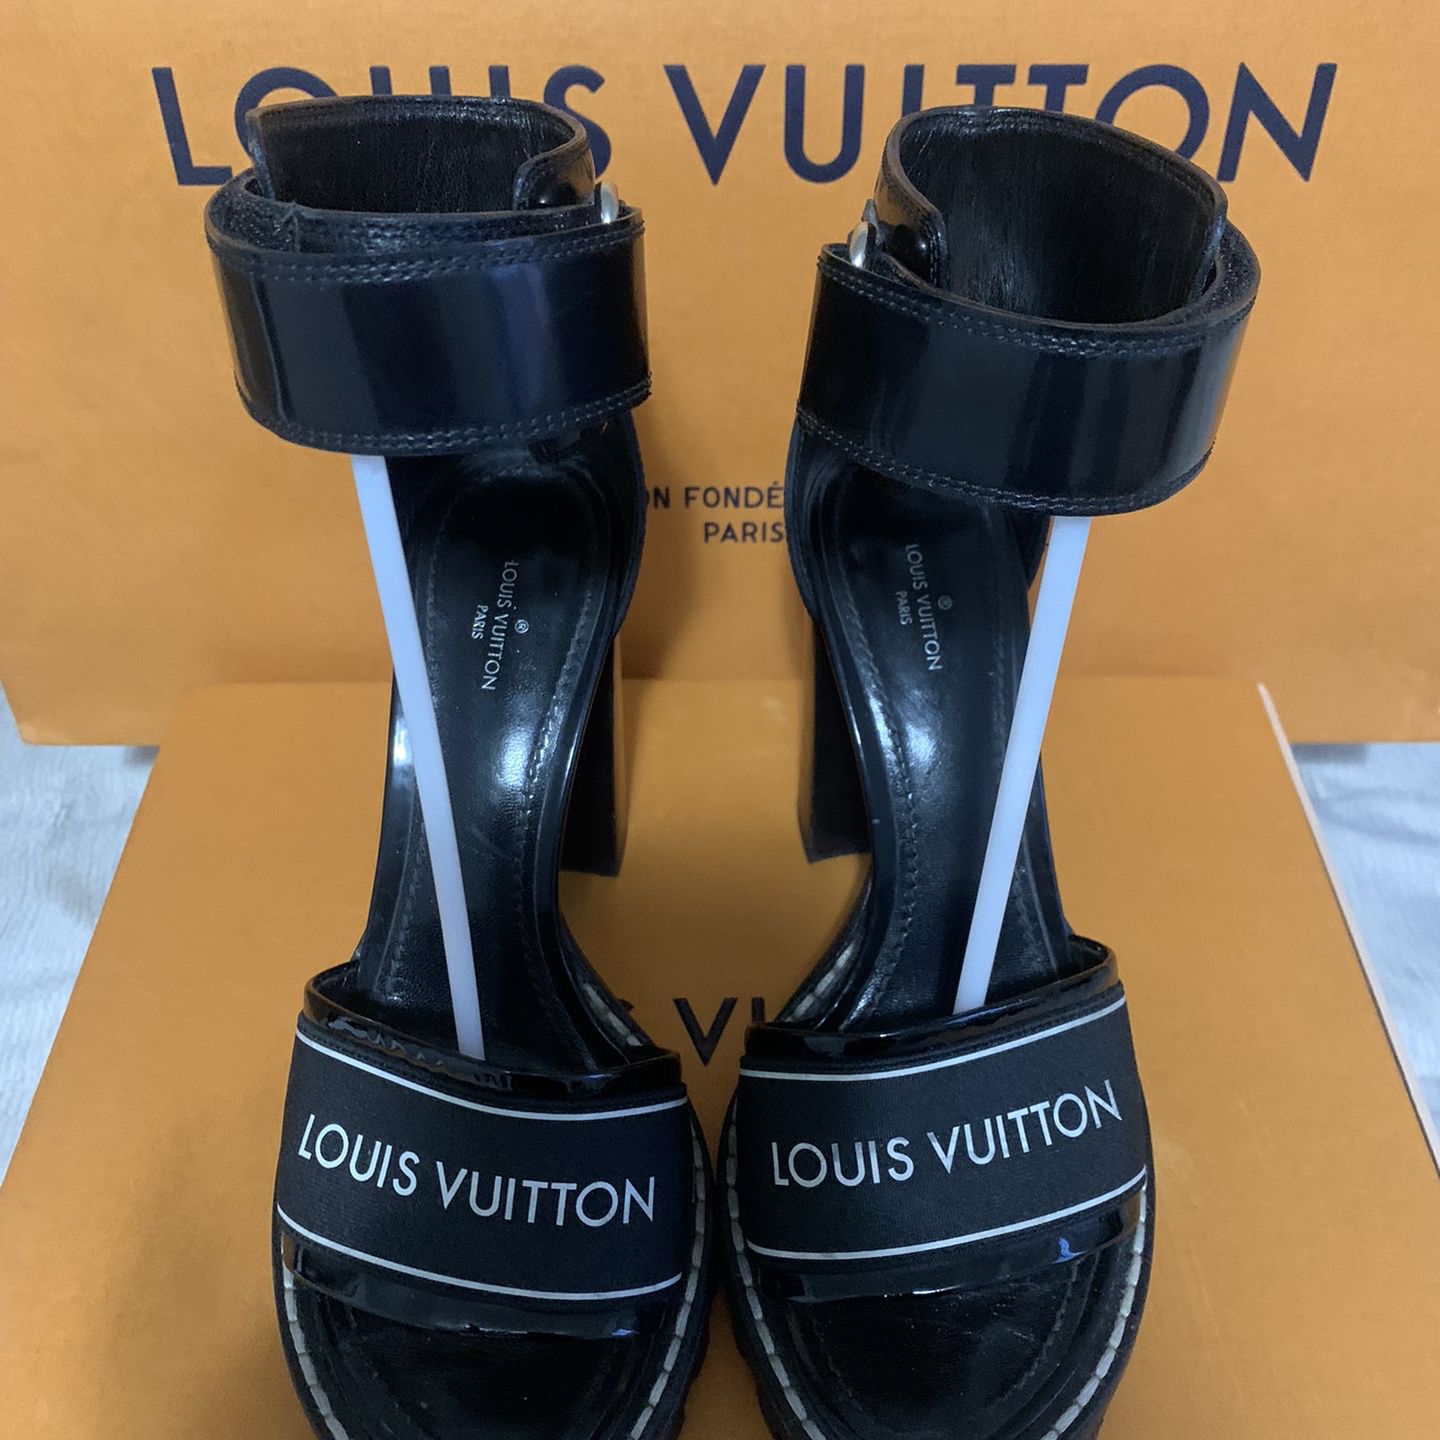 Louis Vuitton - Authenticated Star Trail Sandal - Leather Brown for Women, Never Worn